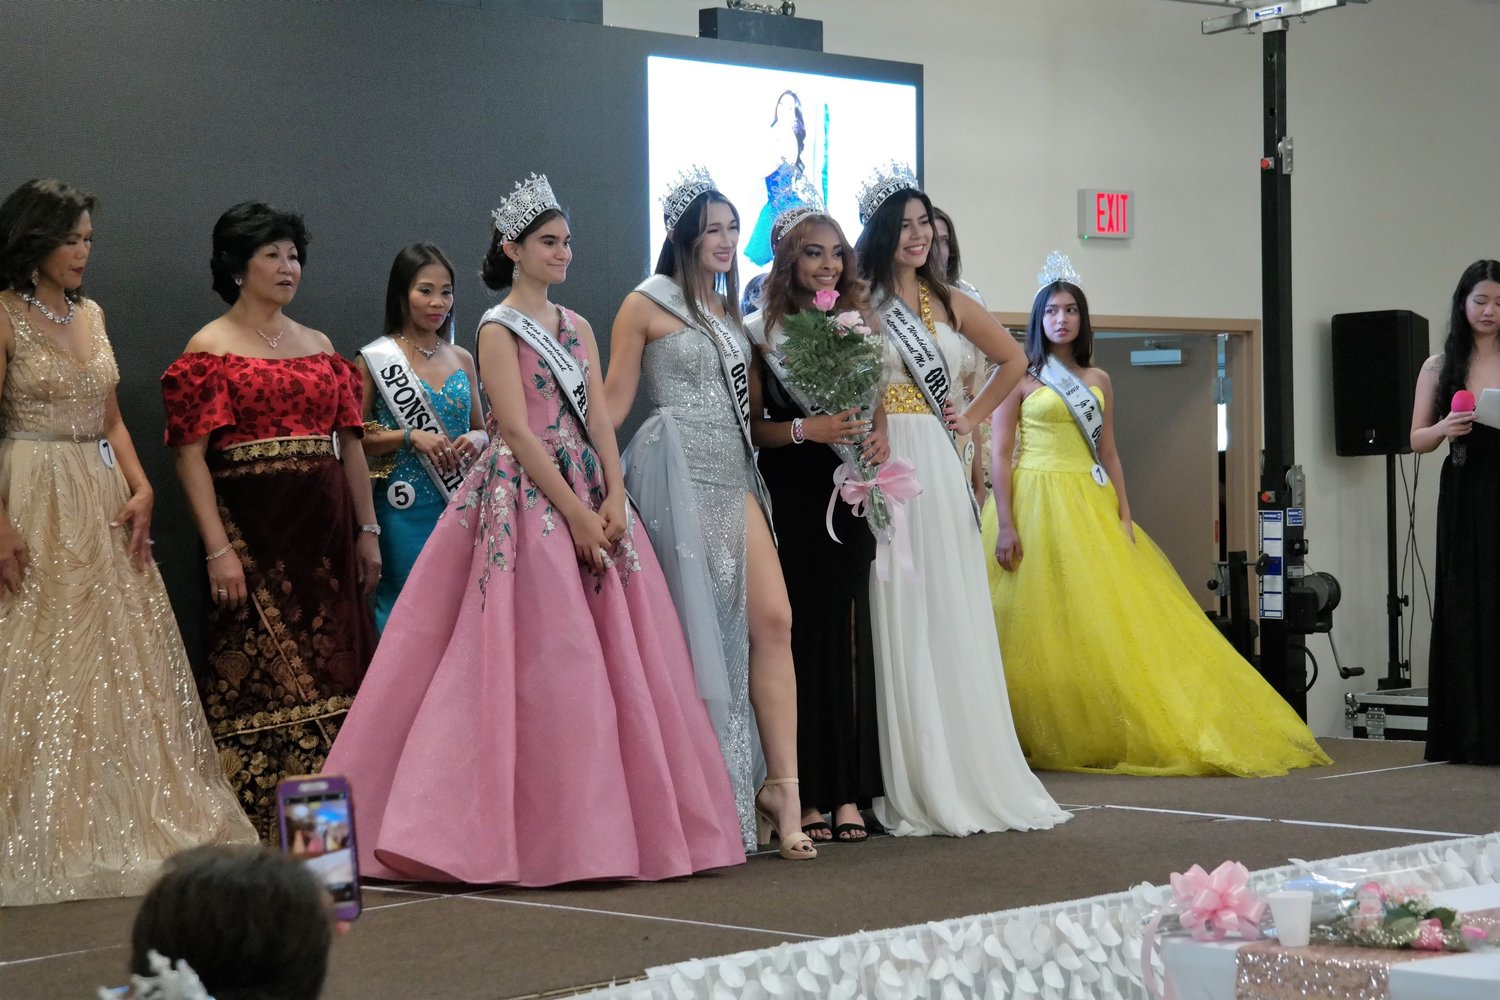 Ladies with crowned Queen Miss Syleena Lawson of Okeechobee (in black gown, front row) .